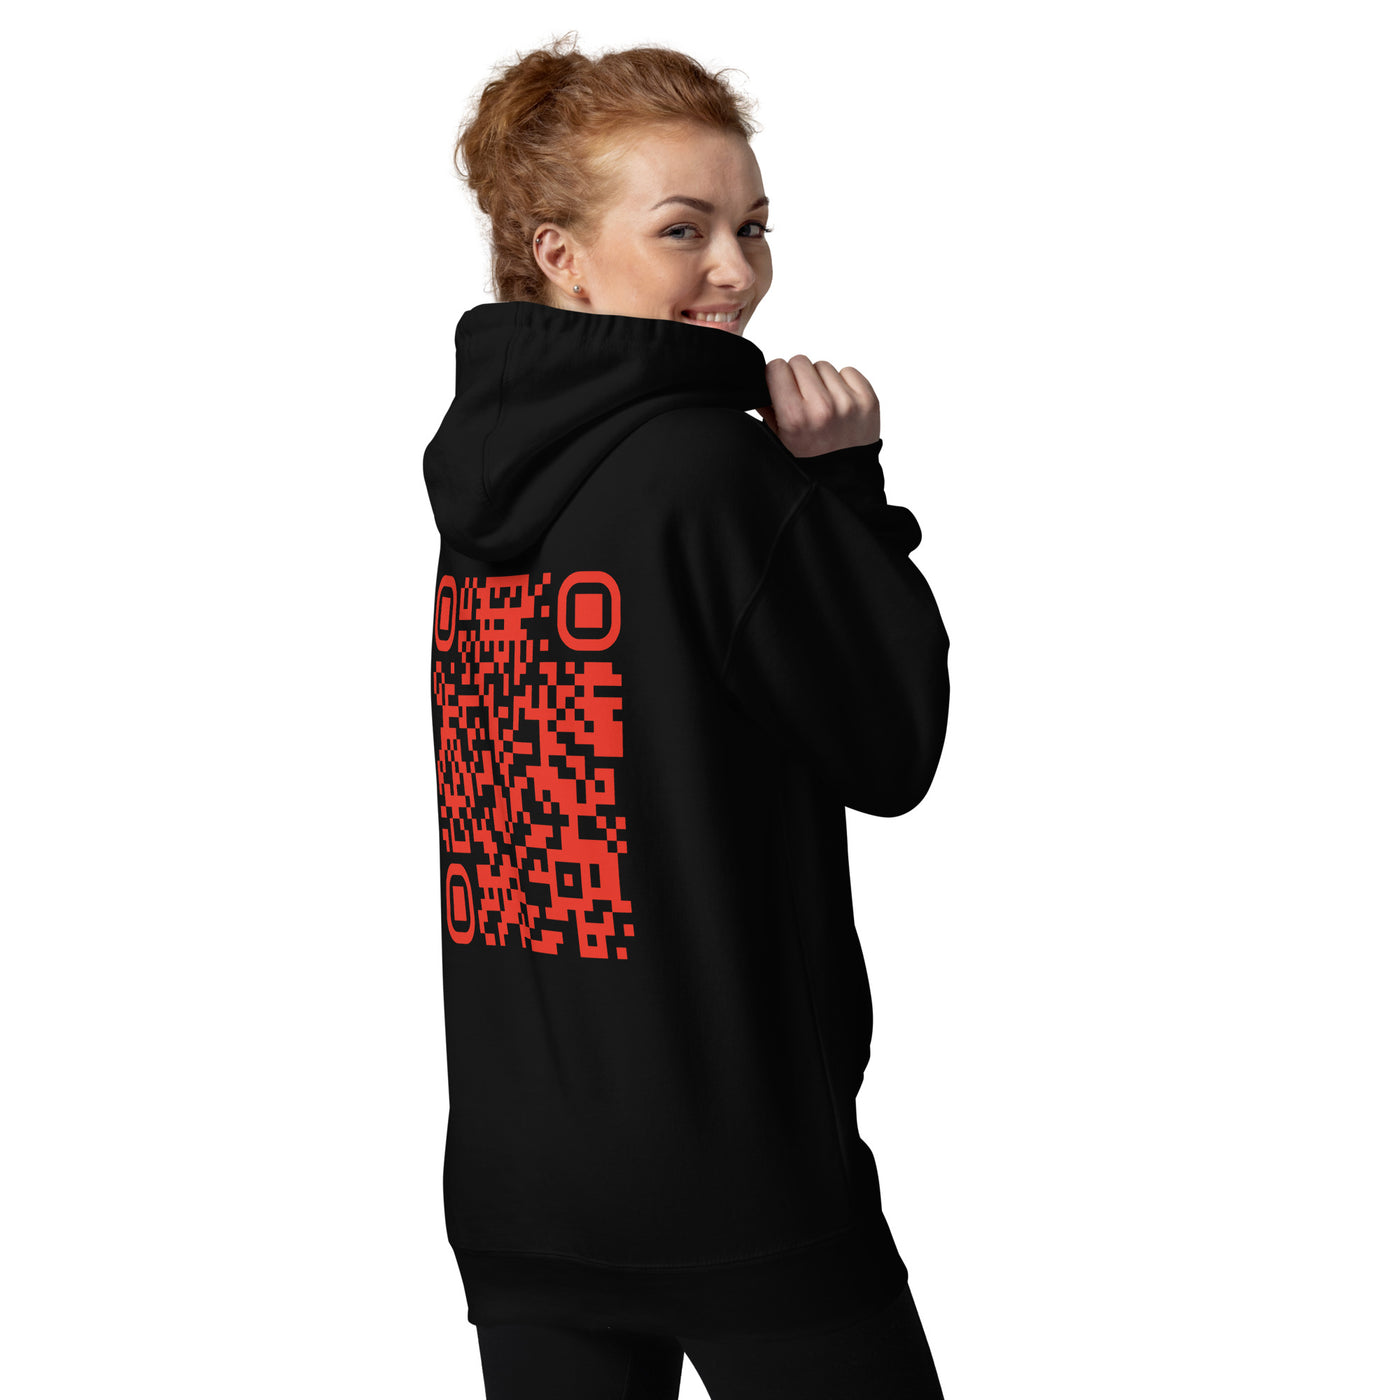 Who's the New Kid, Hacker, Developer, Gamer, Crypto King (RED, No Logo) - Unisex Hoodie Personalized QR Code